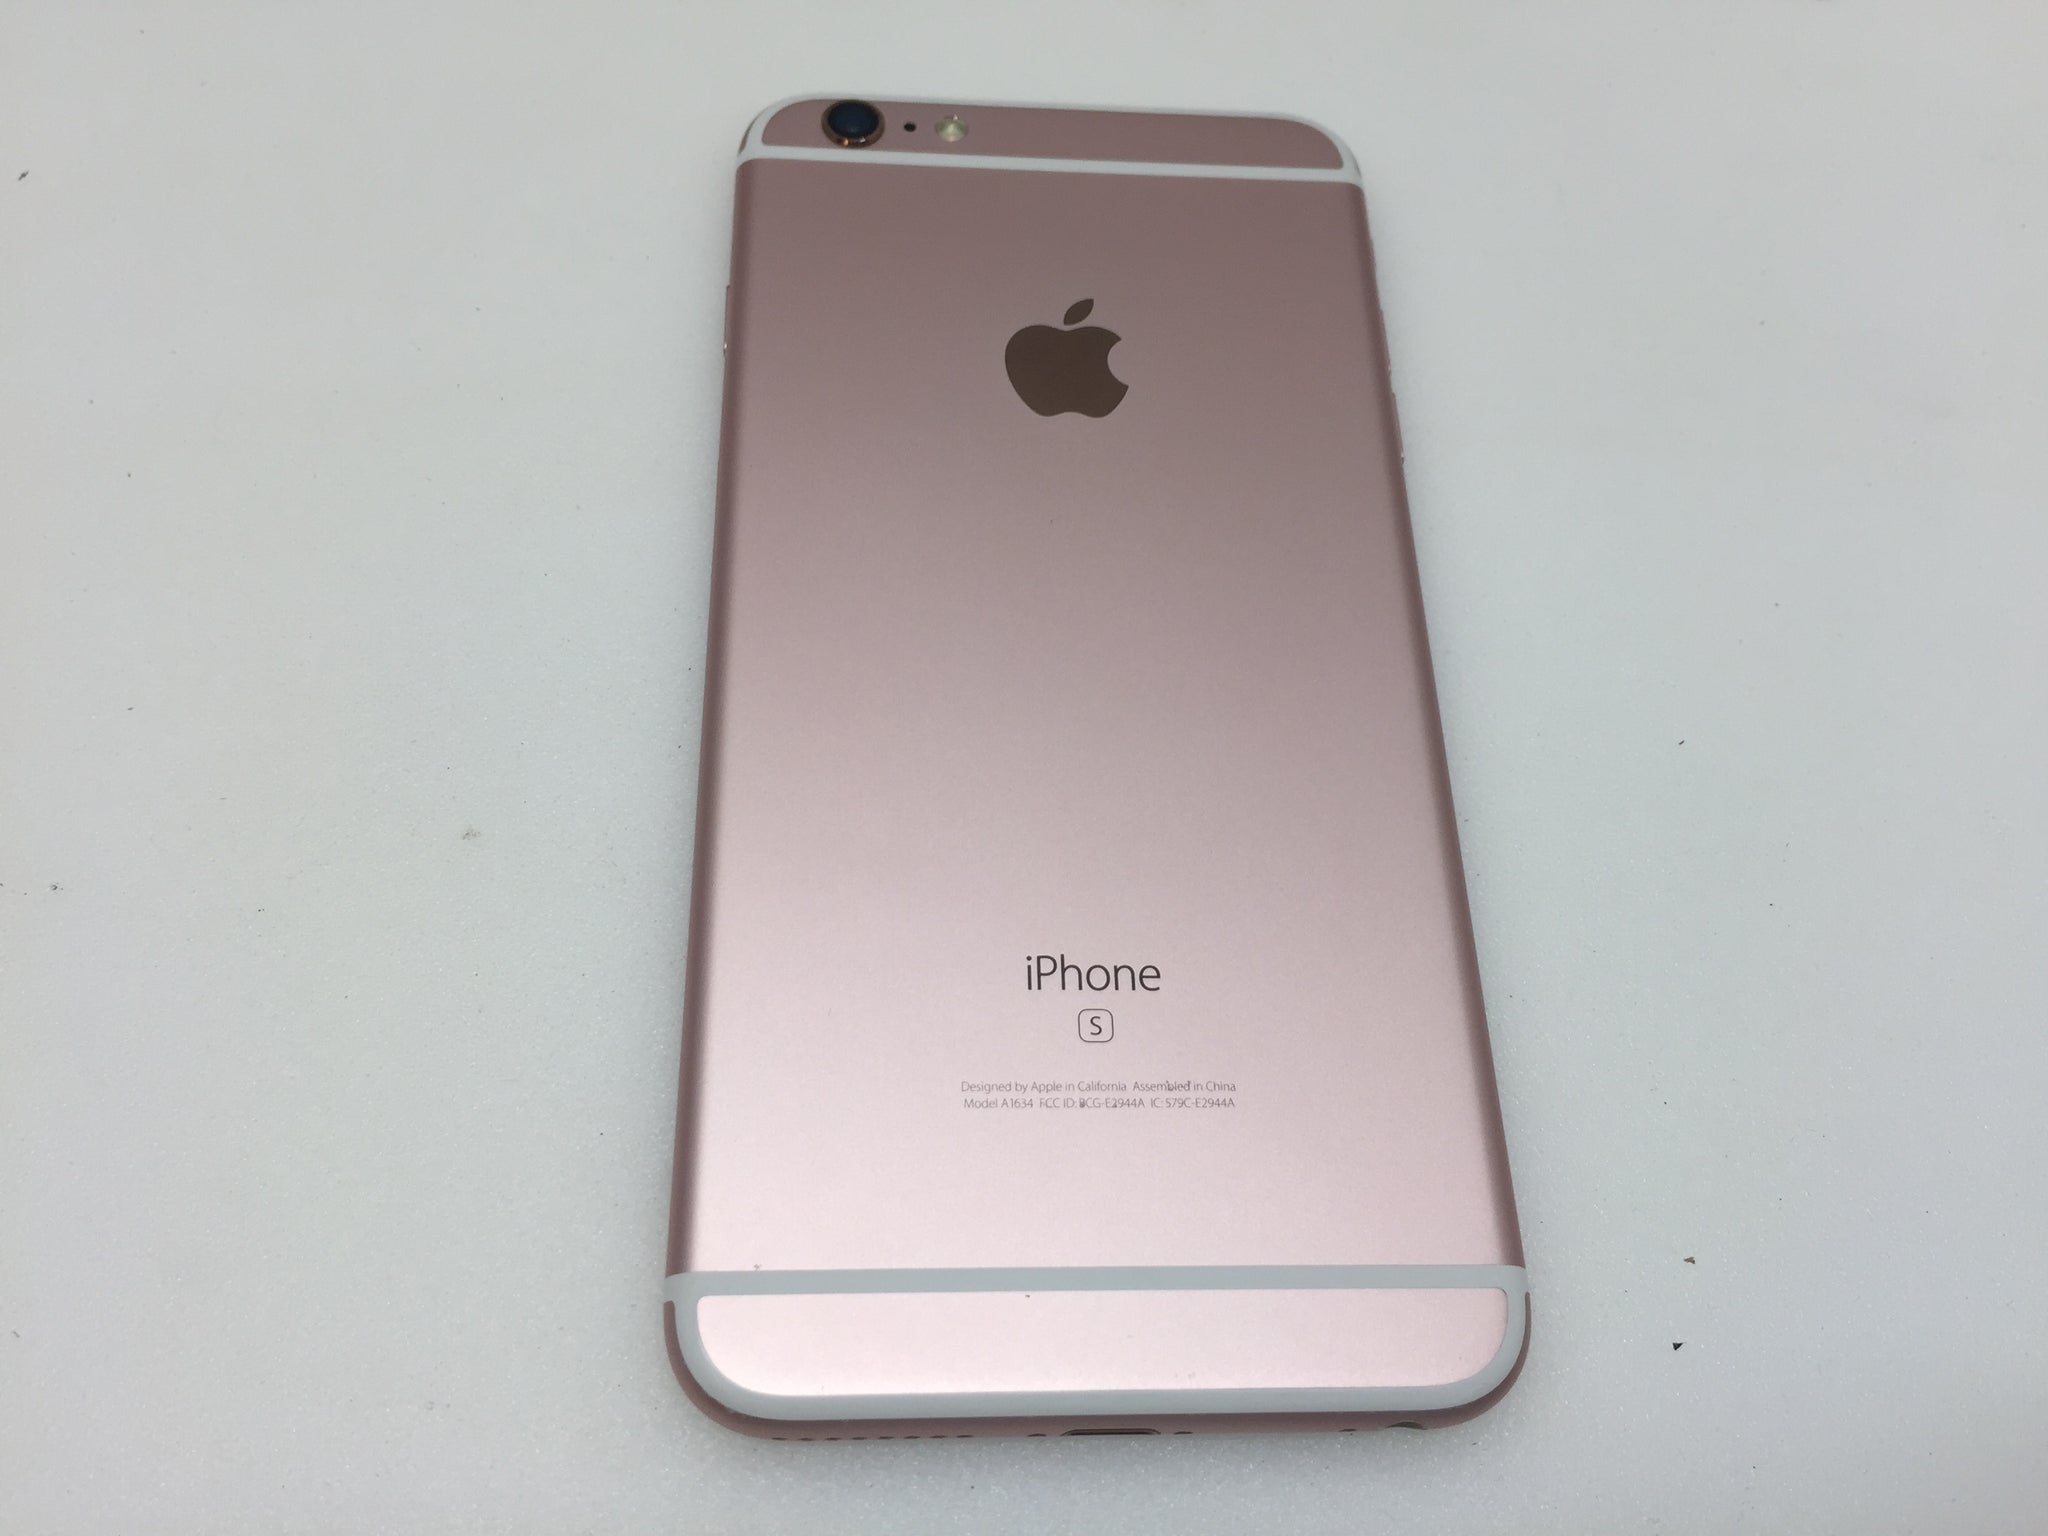 Apple iPhone 6s Plus - 64GB - Rose Gold (AT&T) A1634 (CDMA + GSM